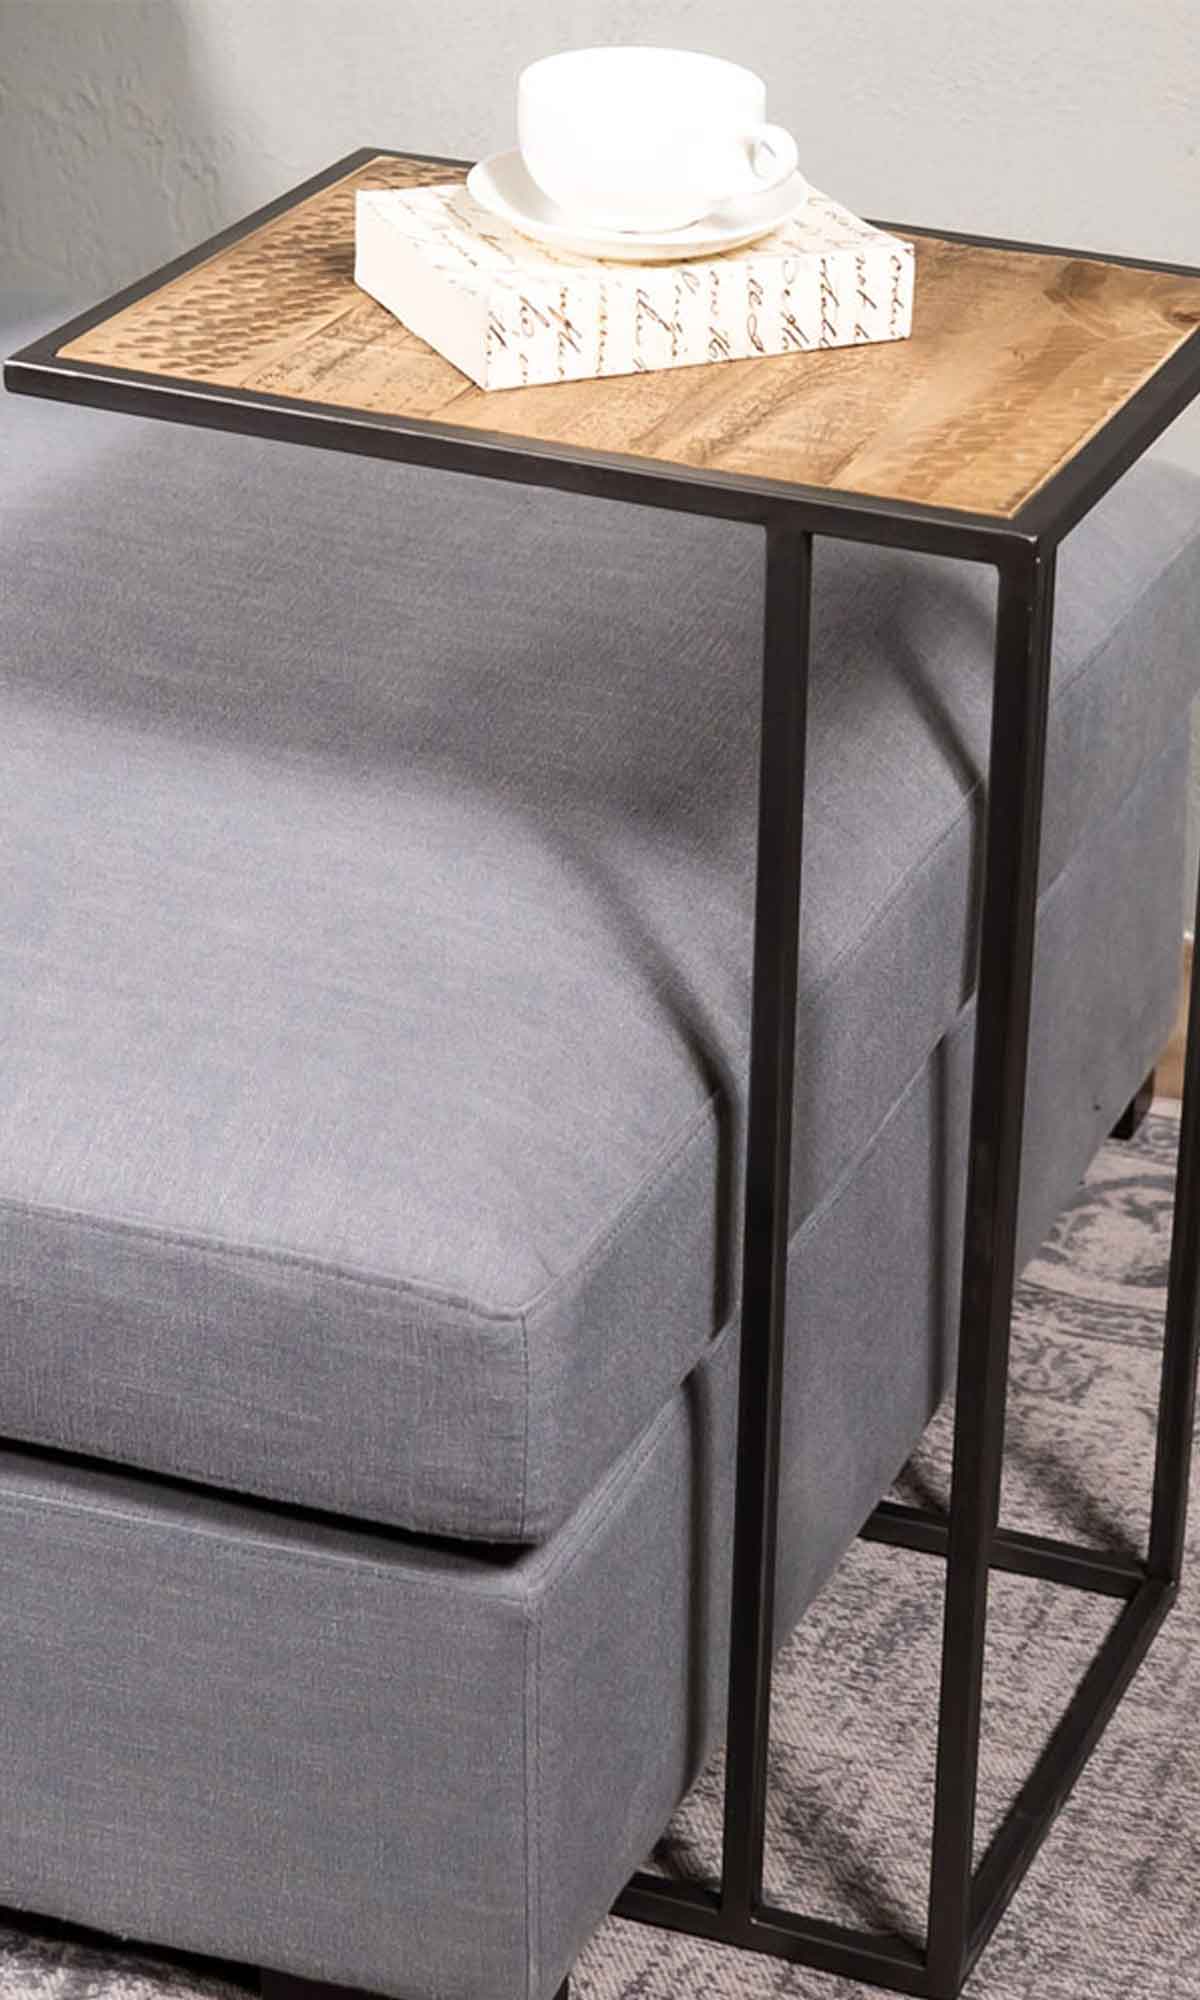 Nera Side Table - Wood and Steel Furnitures